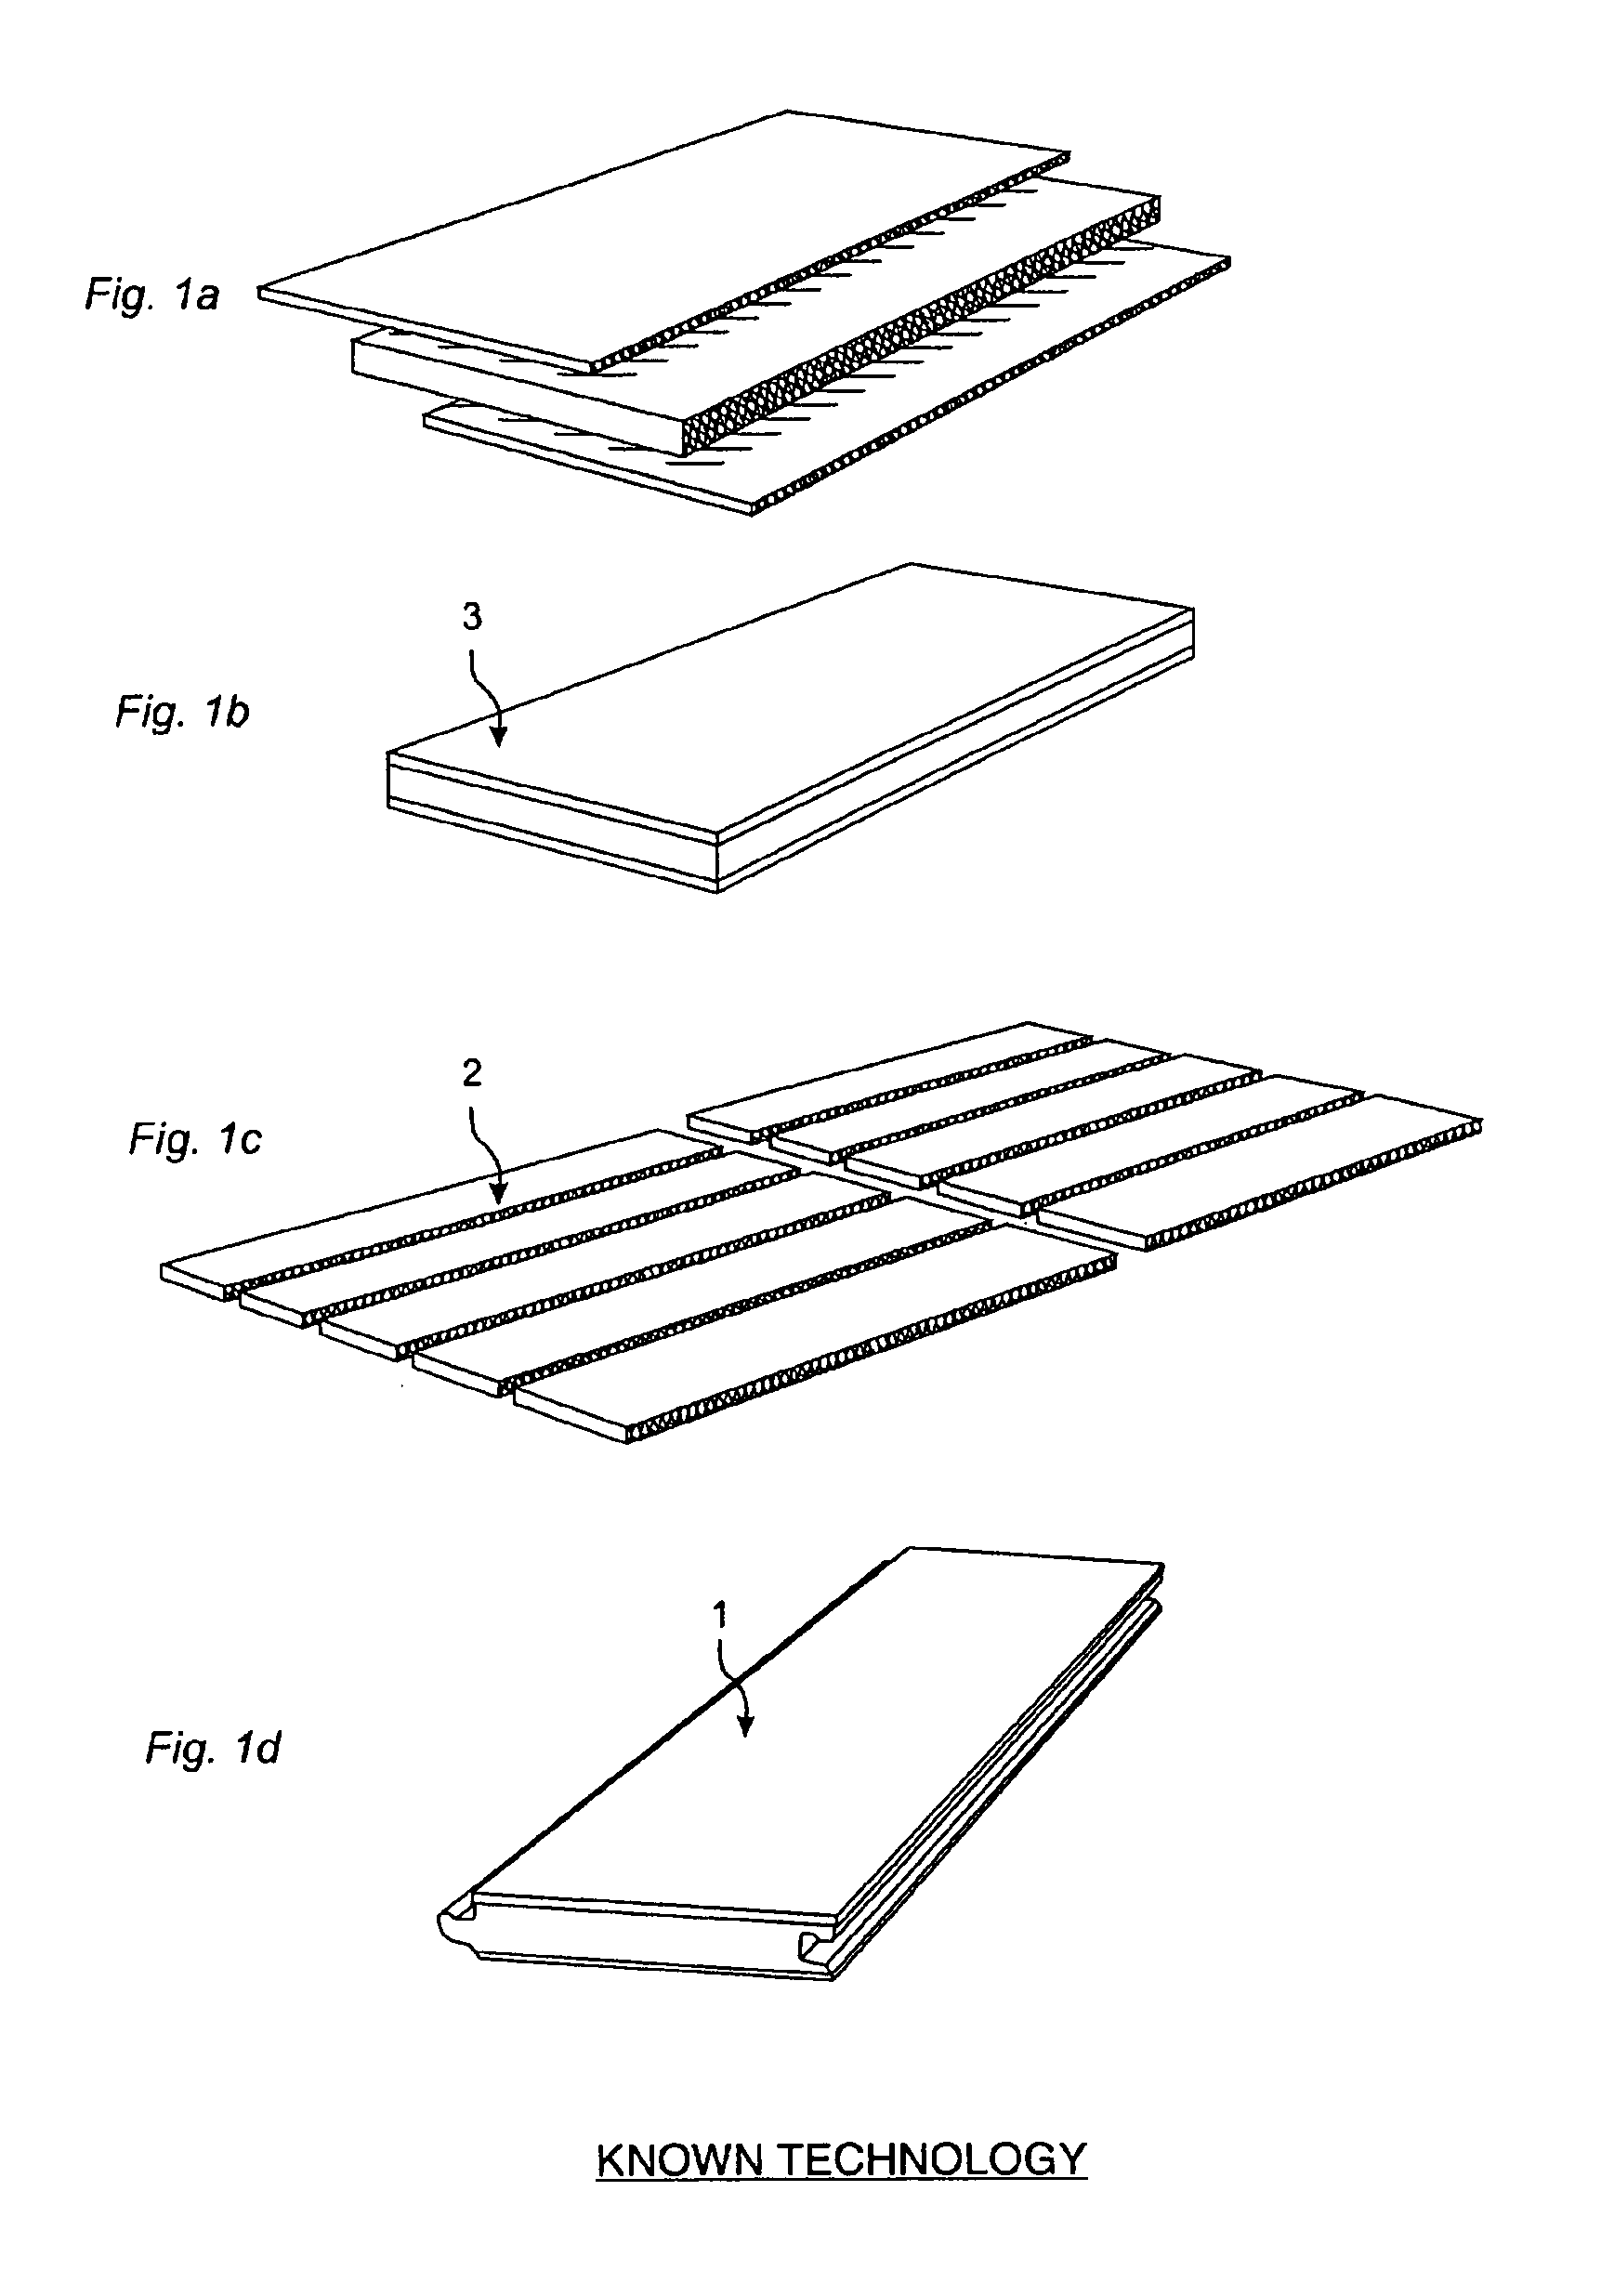 Building panel with compressed edges and method of making same